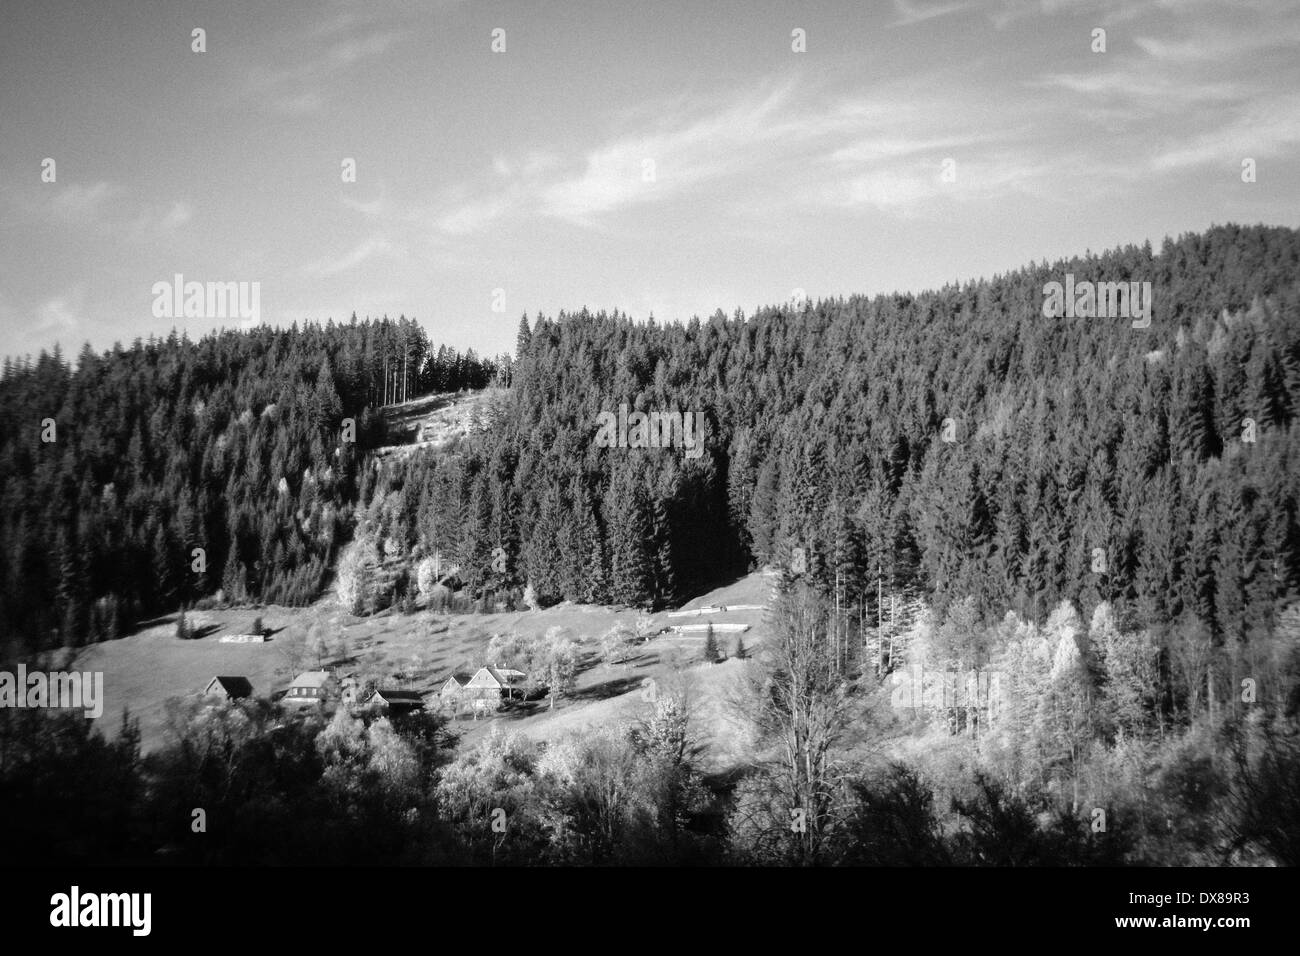 Top of the mountain in Beskydy Moravia Czech Republic, picture in black and white with the pine forest. Stock Photo